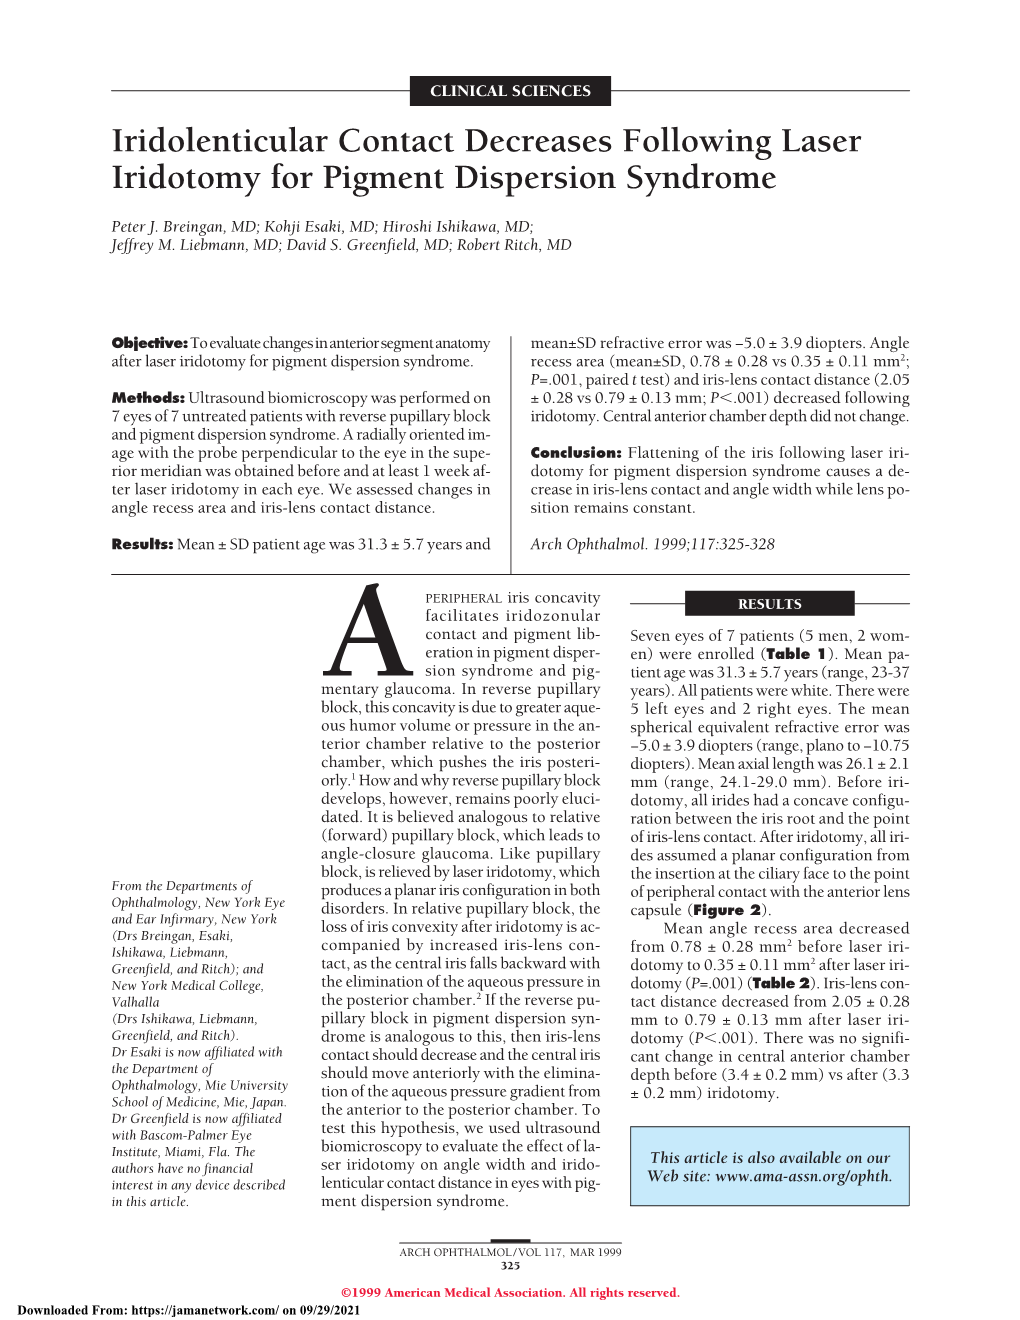 Iridolenticular Contact Decreases Following Laser Iridotomy for Pigment Dispersion Syndrome